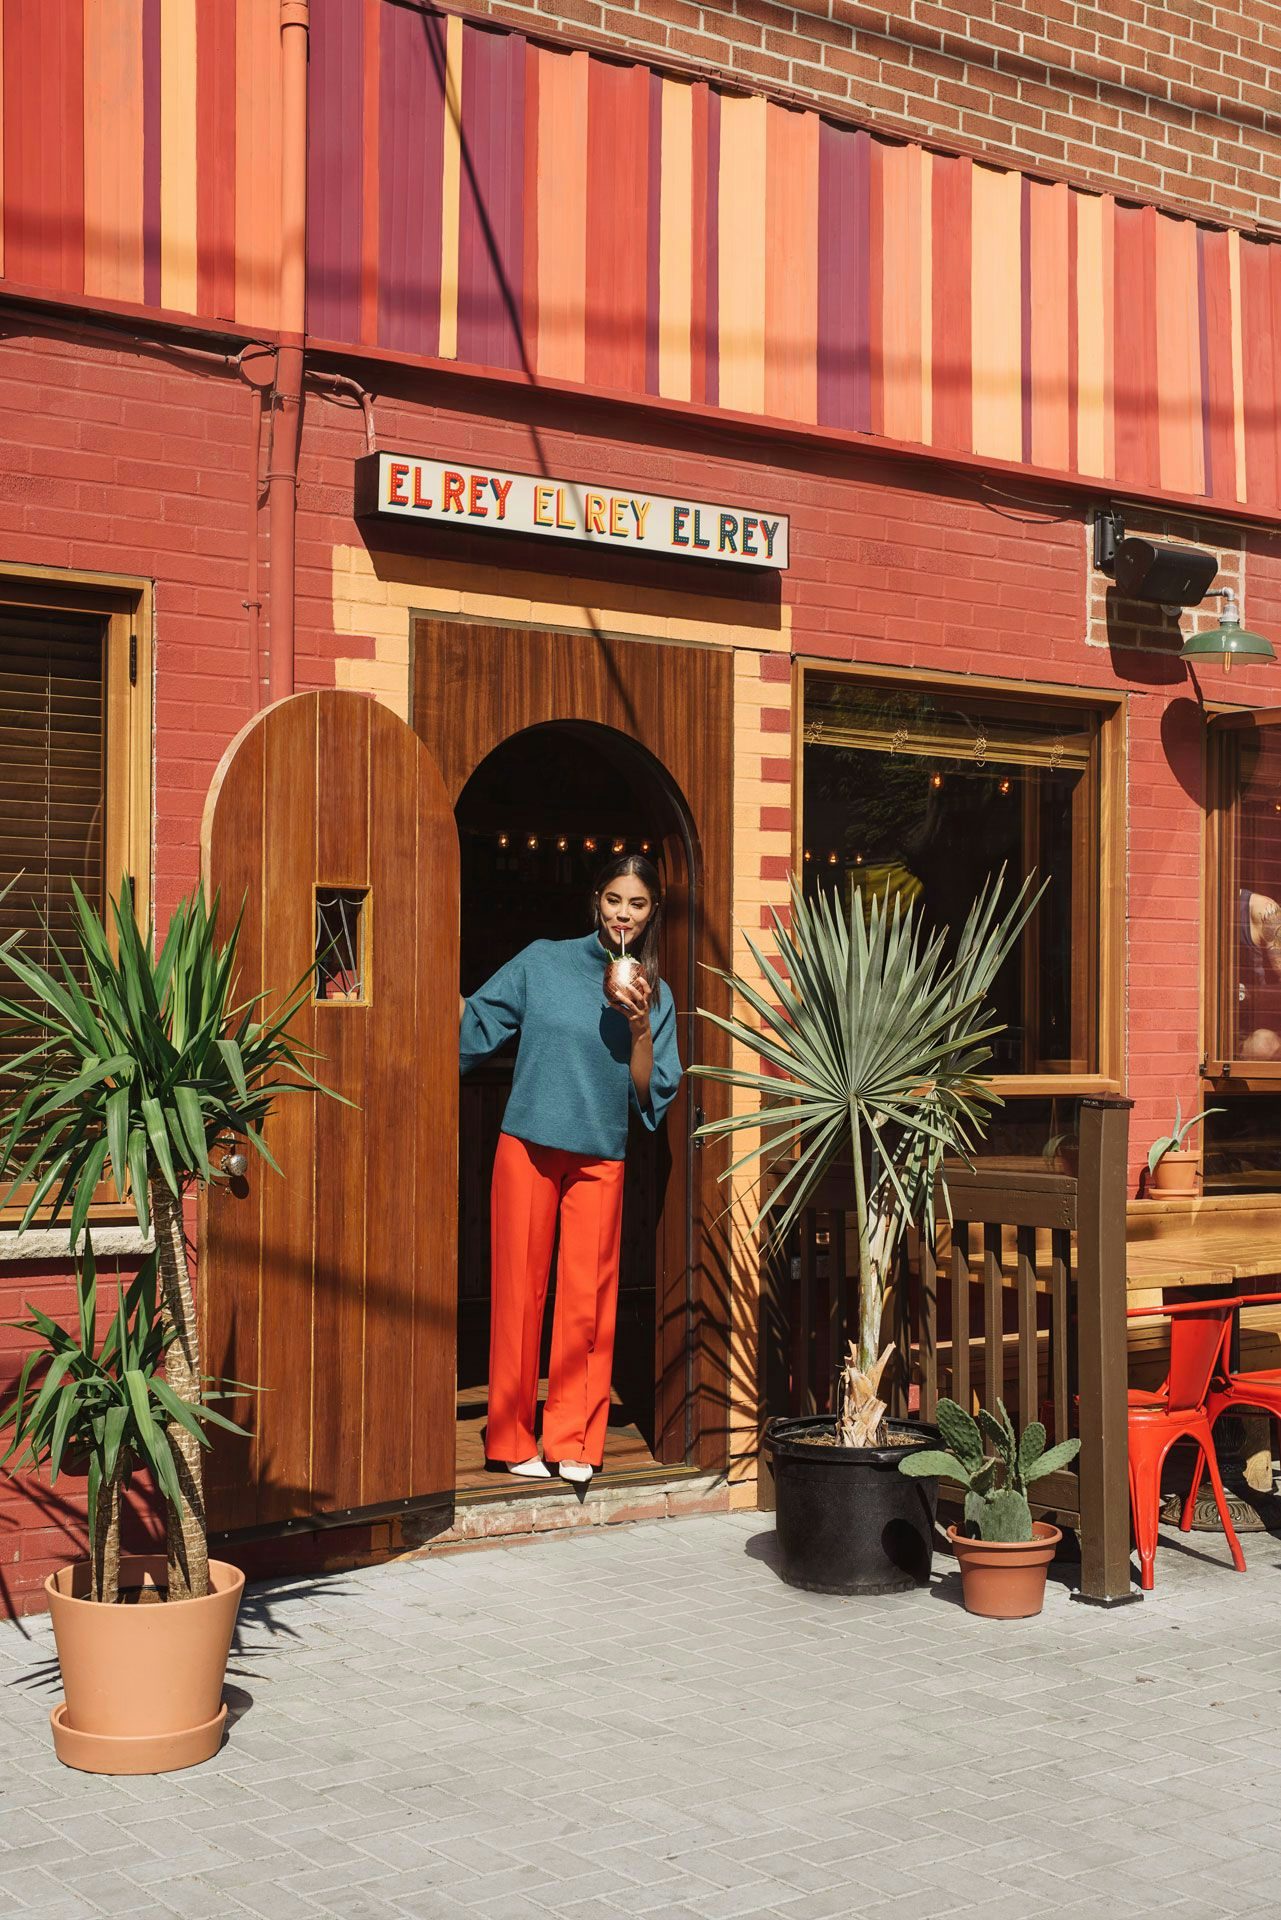 A cheerful woman stands in a doorway sipping a beverage, framed by the wooden entrance of Toronto's "EL REY" restaurant with a warm, inviting exterior and potted plants